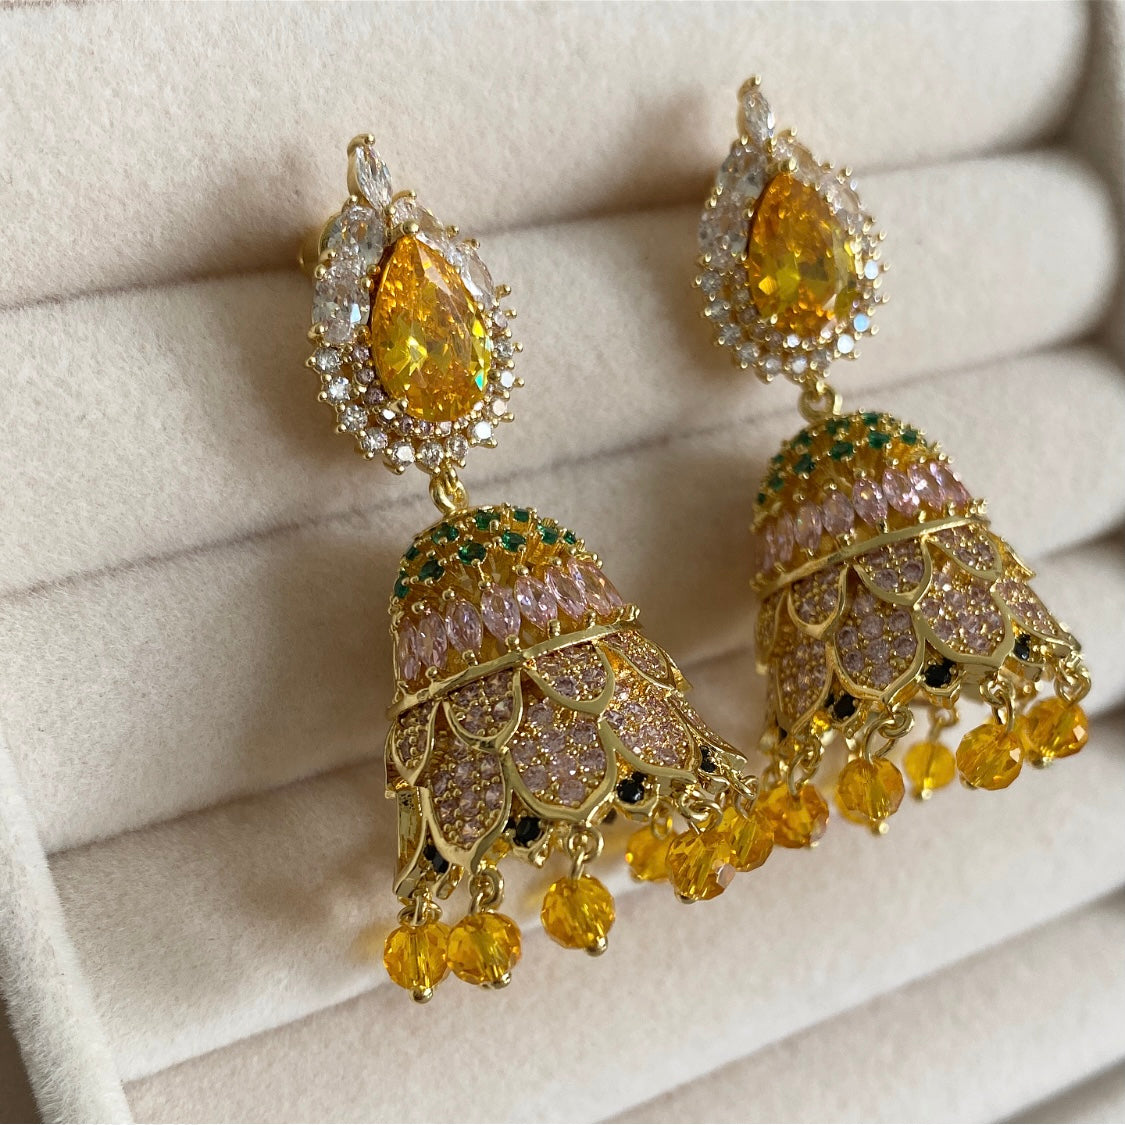 Aaliya Jhumki Earrings offer a timeless, classic look with a modern twist. Intricately crafted jhumki earrings feature shimmering CZ crystals, which reflect light beautifully and make a statement wherever they are worn. The combination of traditional style with a contemporary look make these earrings a perfect choice for any occasion.